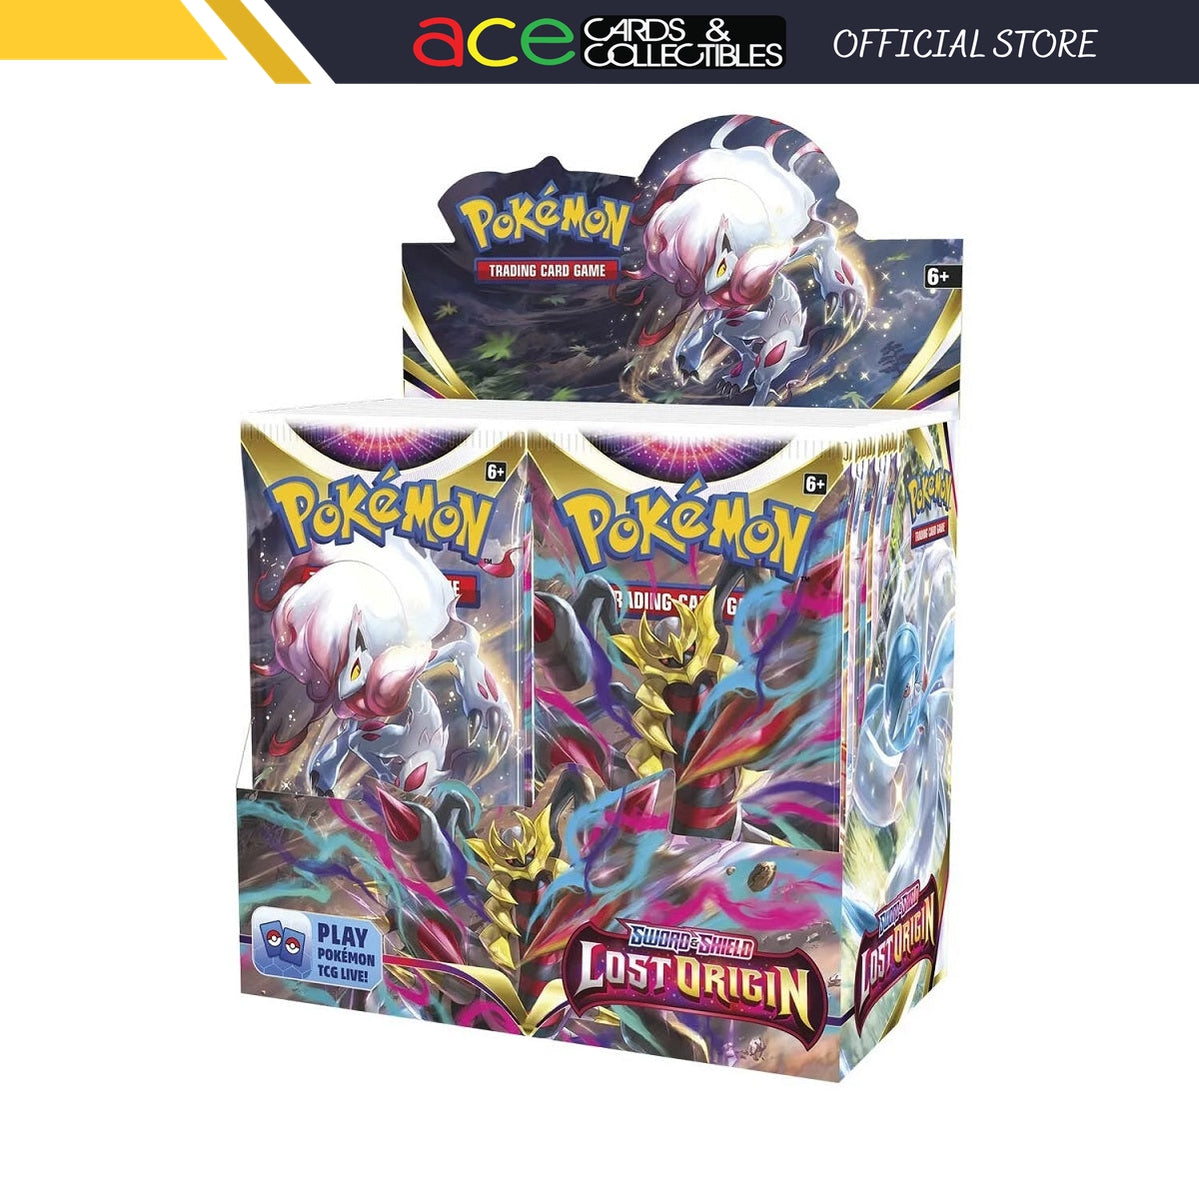 Pokemon TCG: Sword &amp; Shield SS11 Lost Origin - Booster Box-The Pokémon Company International-Ace Cards &amp; Collectibles